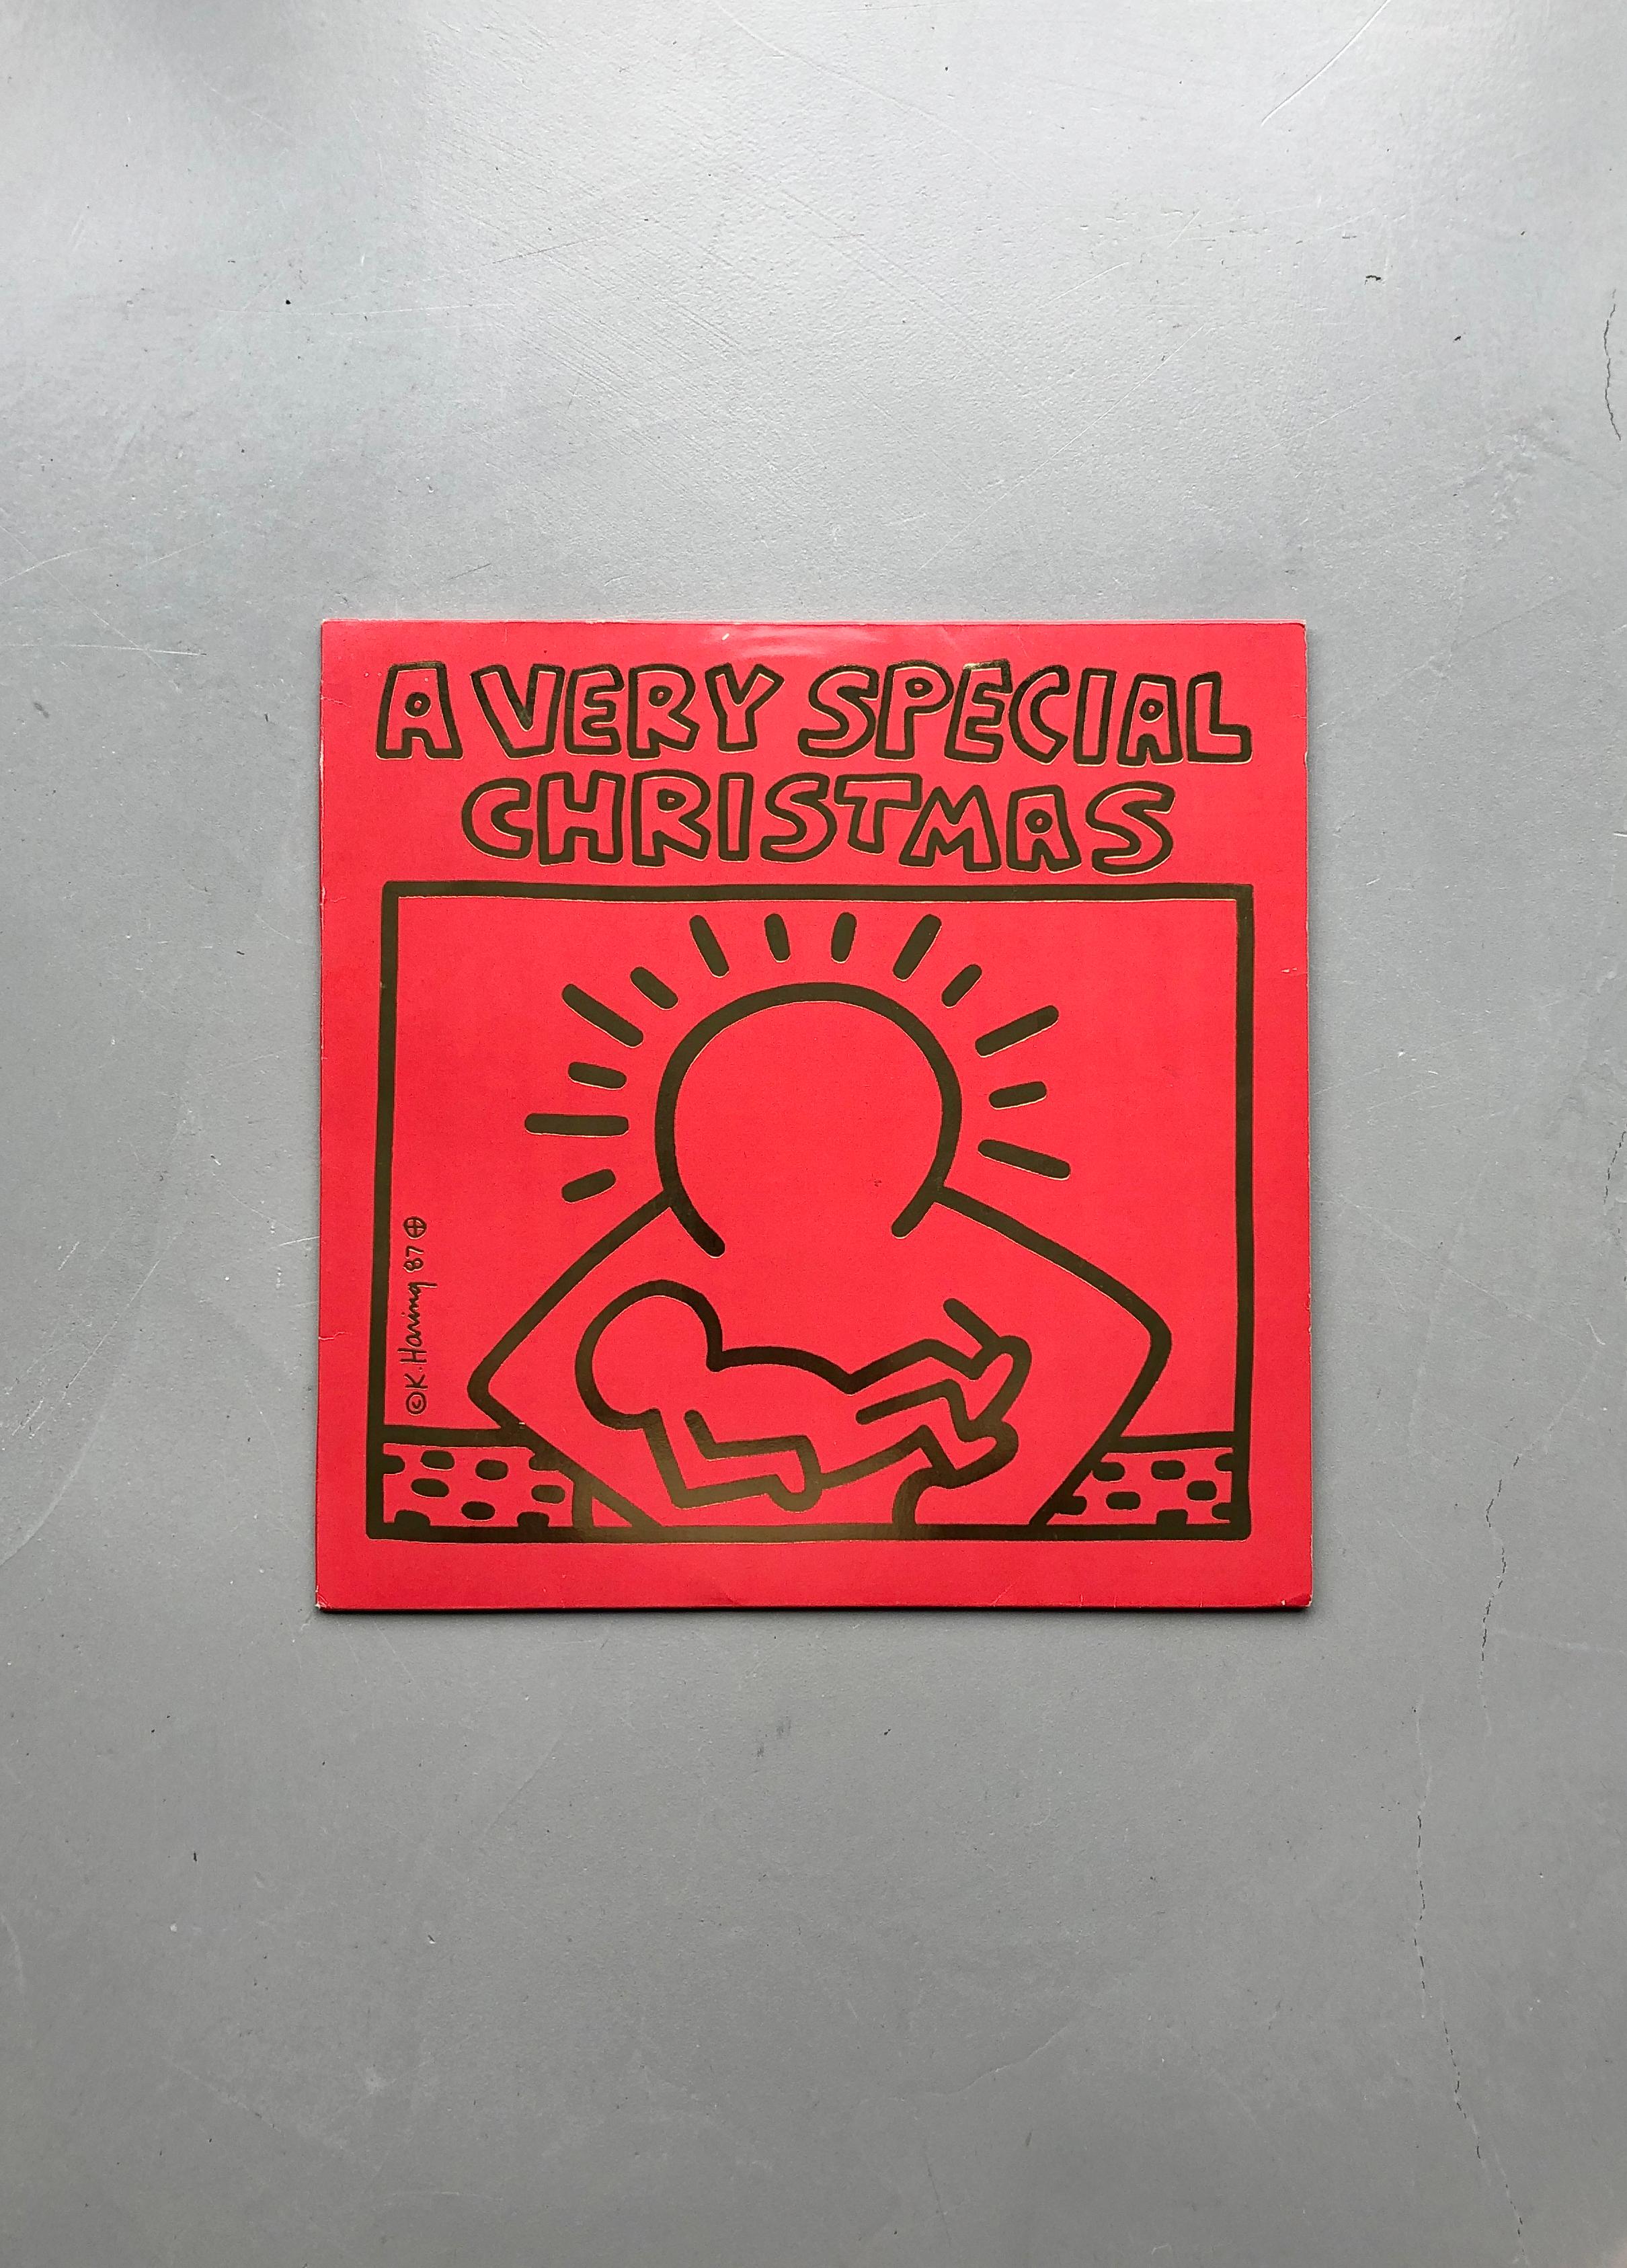 American A Very Special Christmas Original 1987 first pressing Vinyl Record  For Sale